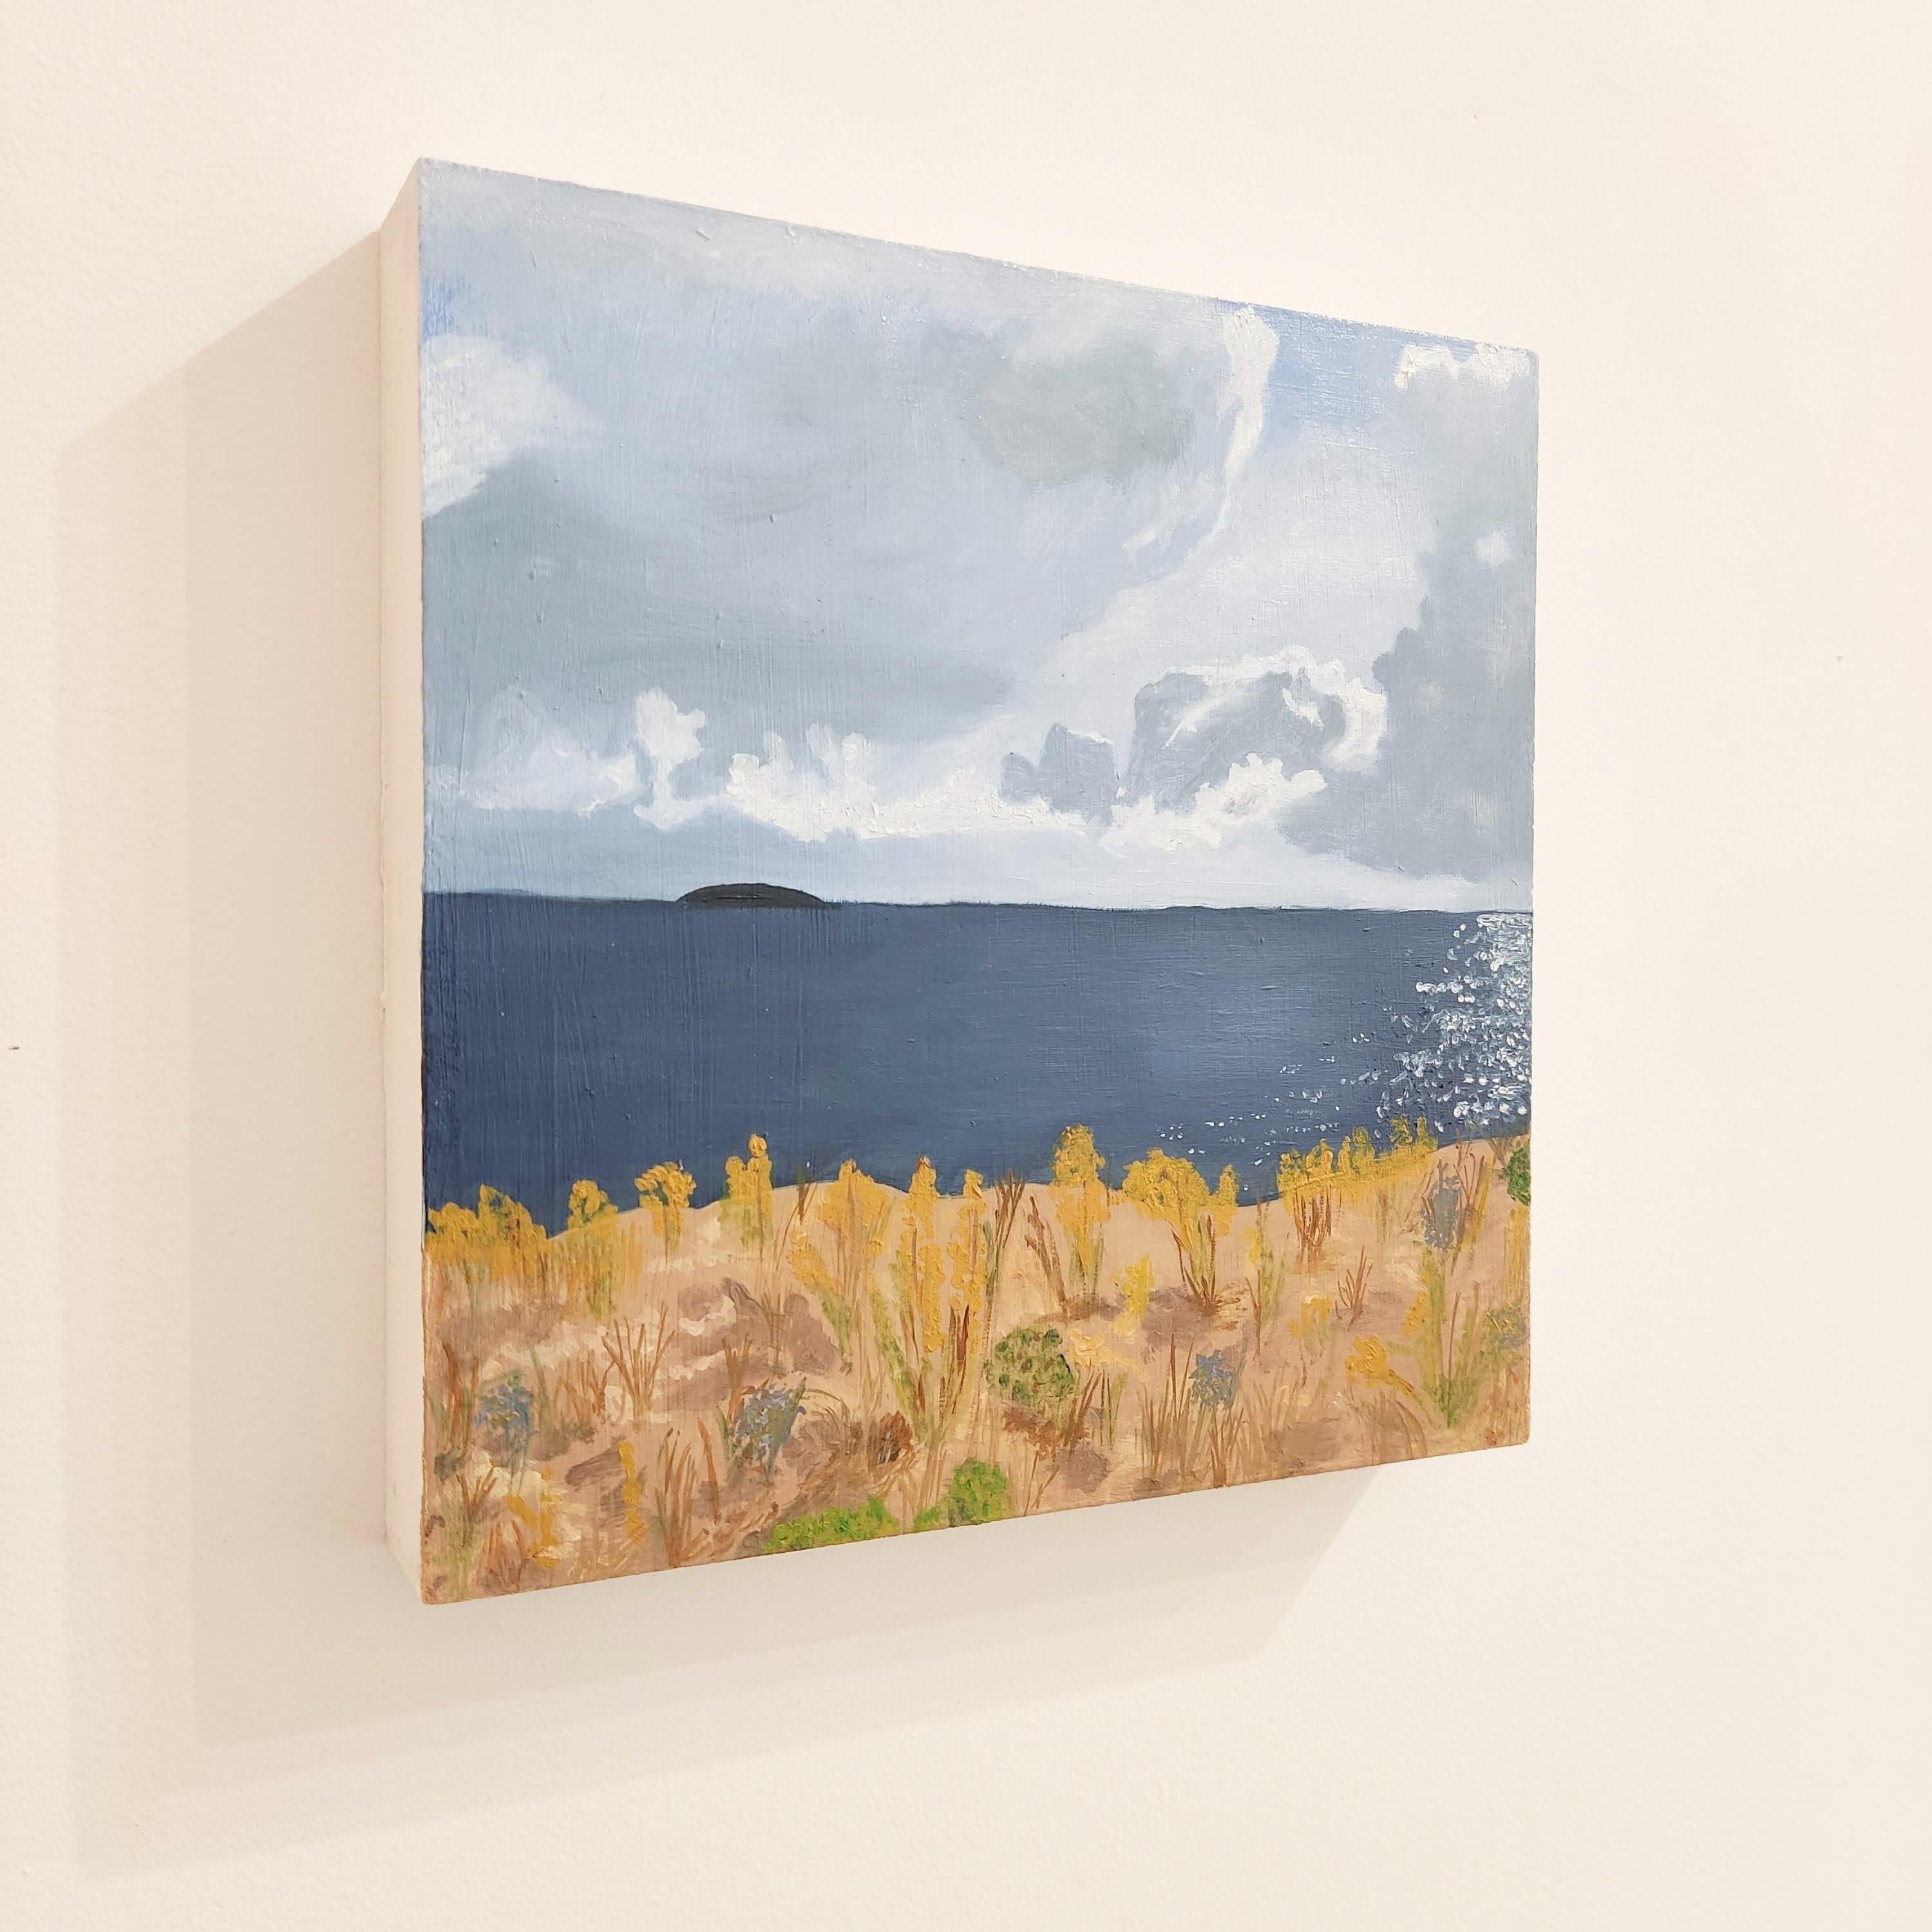 Oil on Wood panel - Contemporary Landscape painting, Seaside Painting
Work Title : Ciel et Terre (EN : Sky and earth)
Artist : Gabriel Riesnert (French artist, Born in 1970, lives and works in Paris and south of France.)
The work is signed, titled